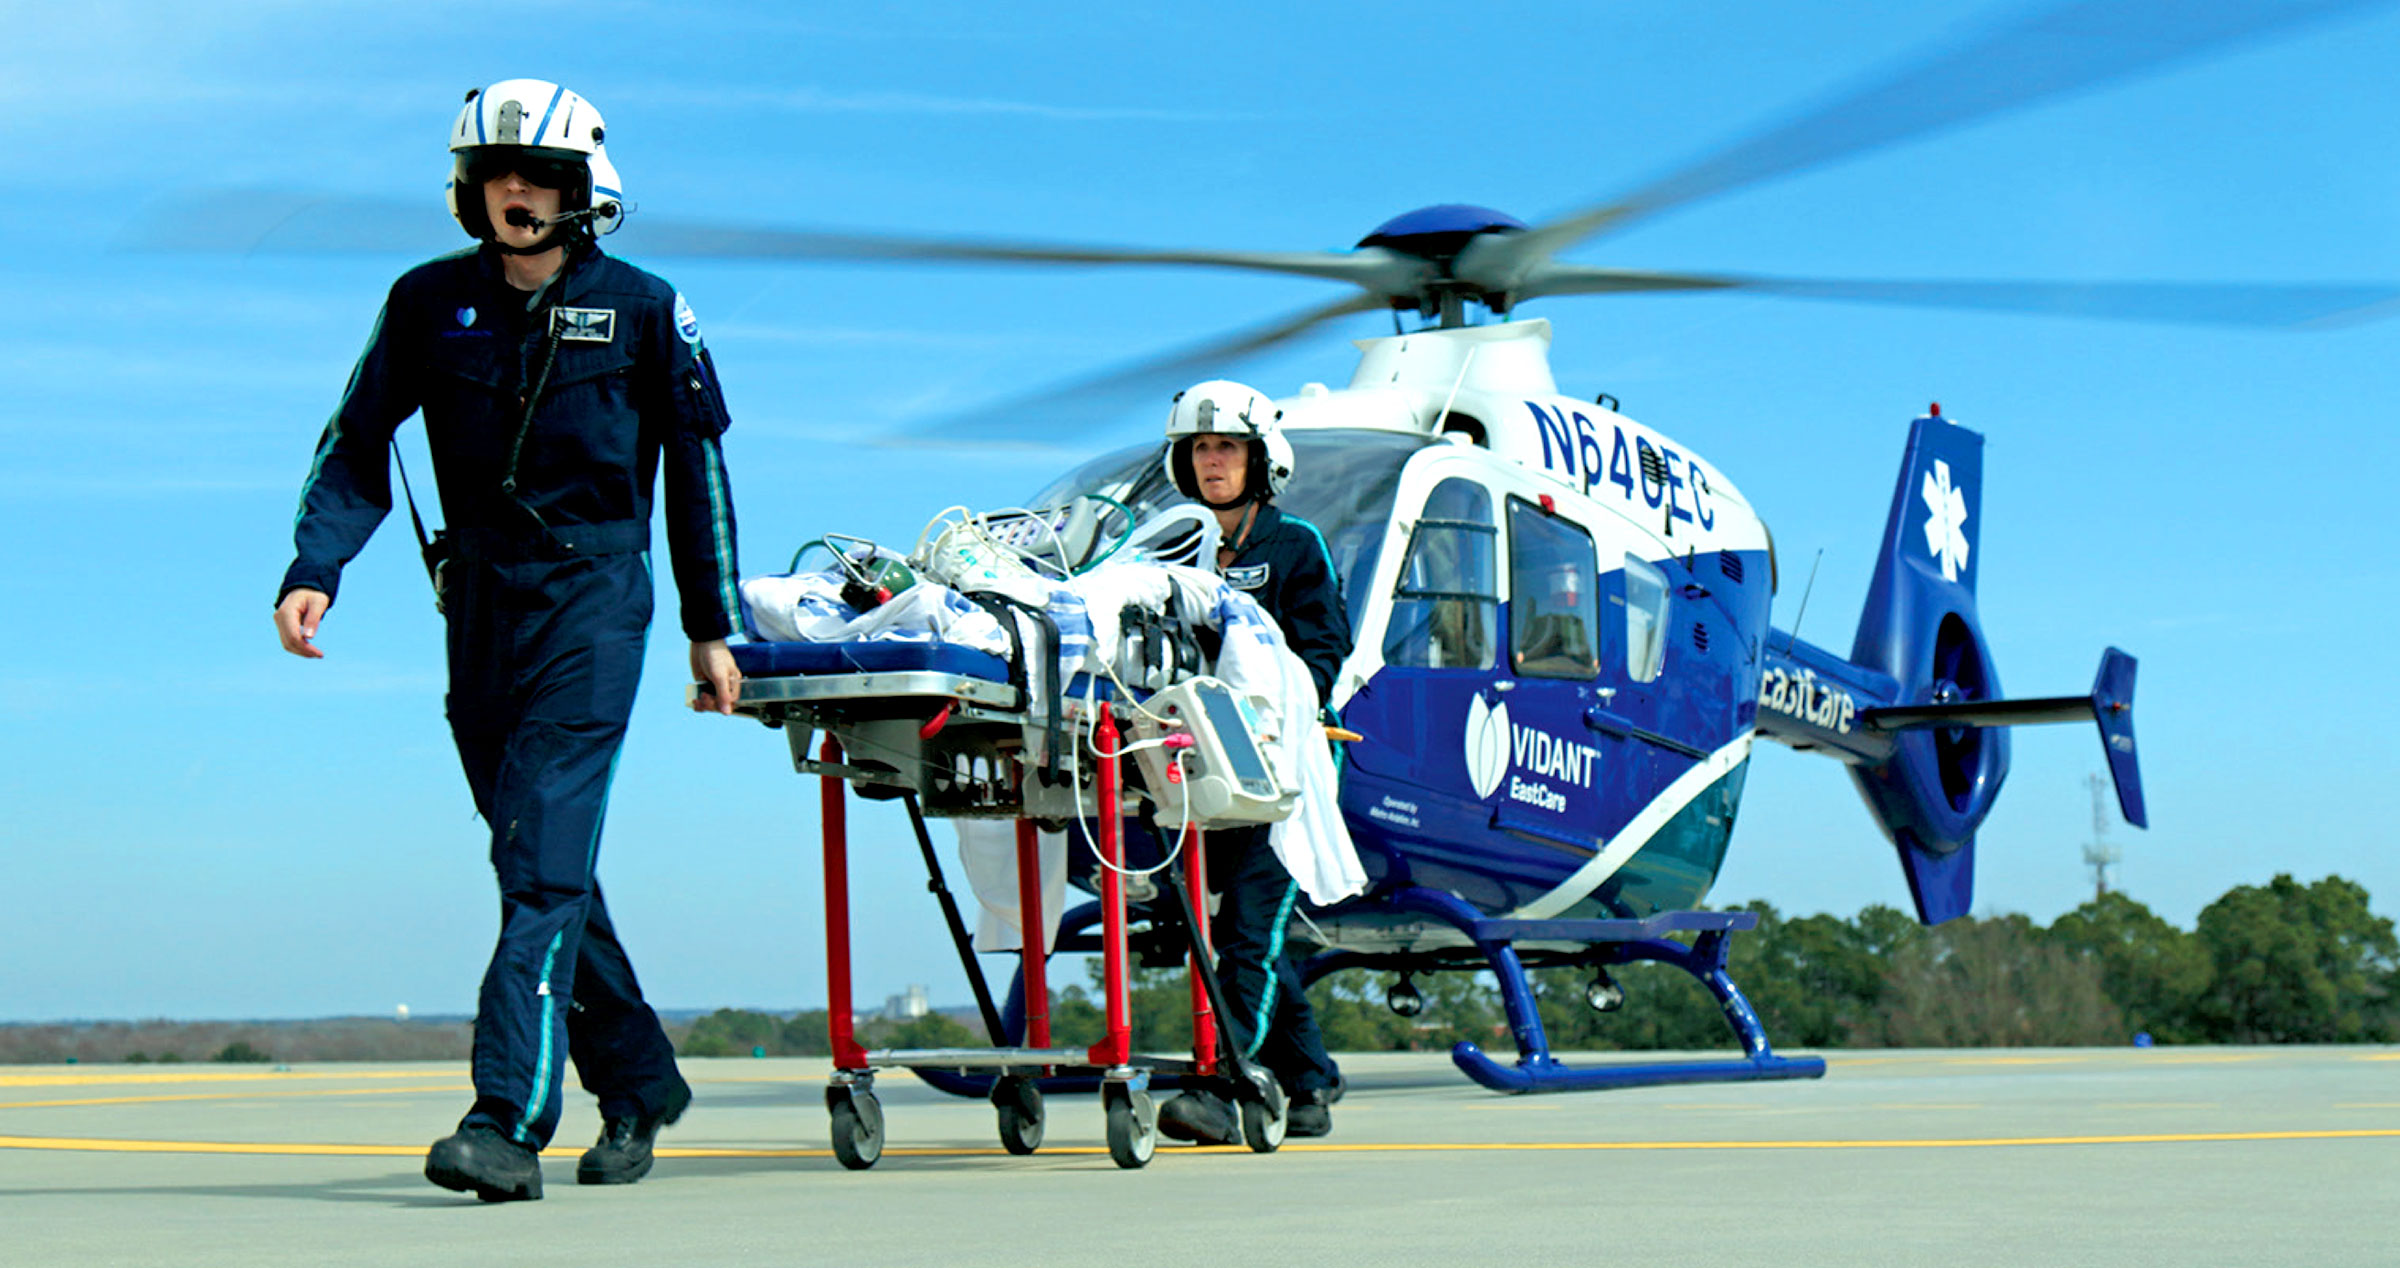 Two emergency response crewmen take a patient off a helicopter and walk towards hospital.